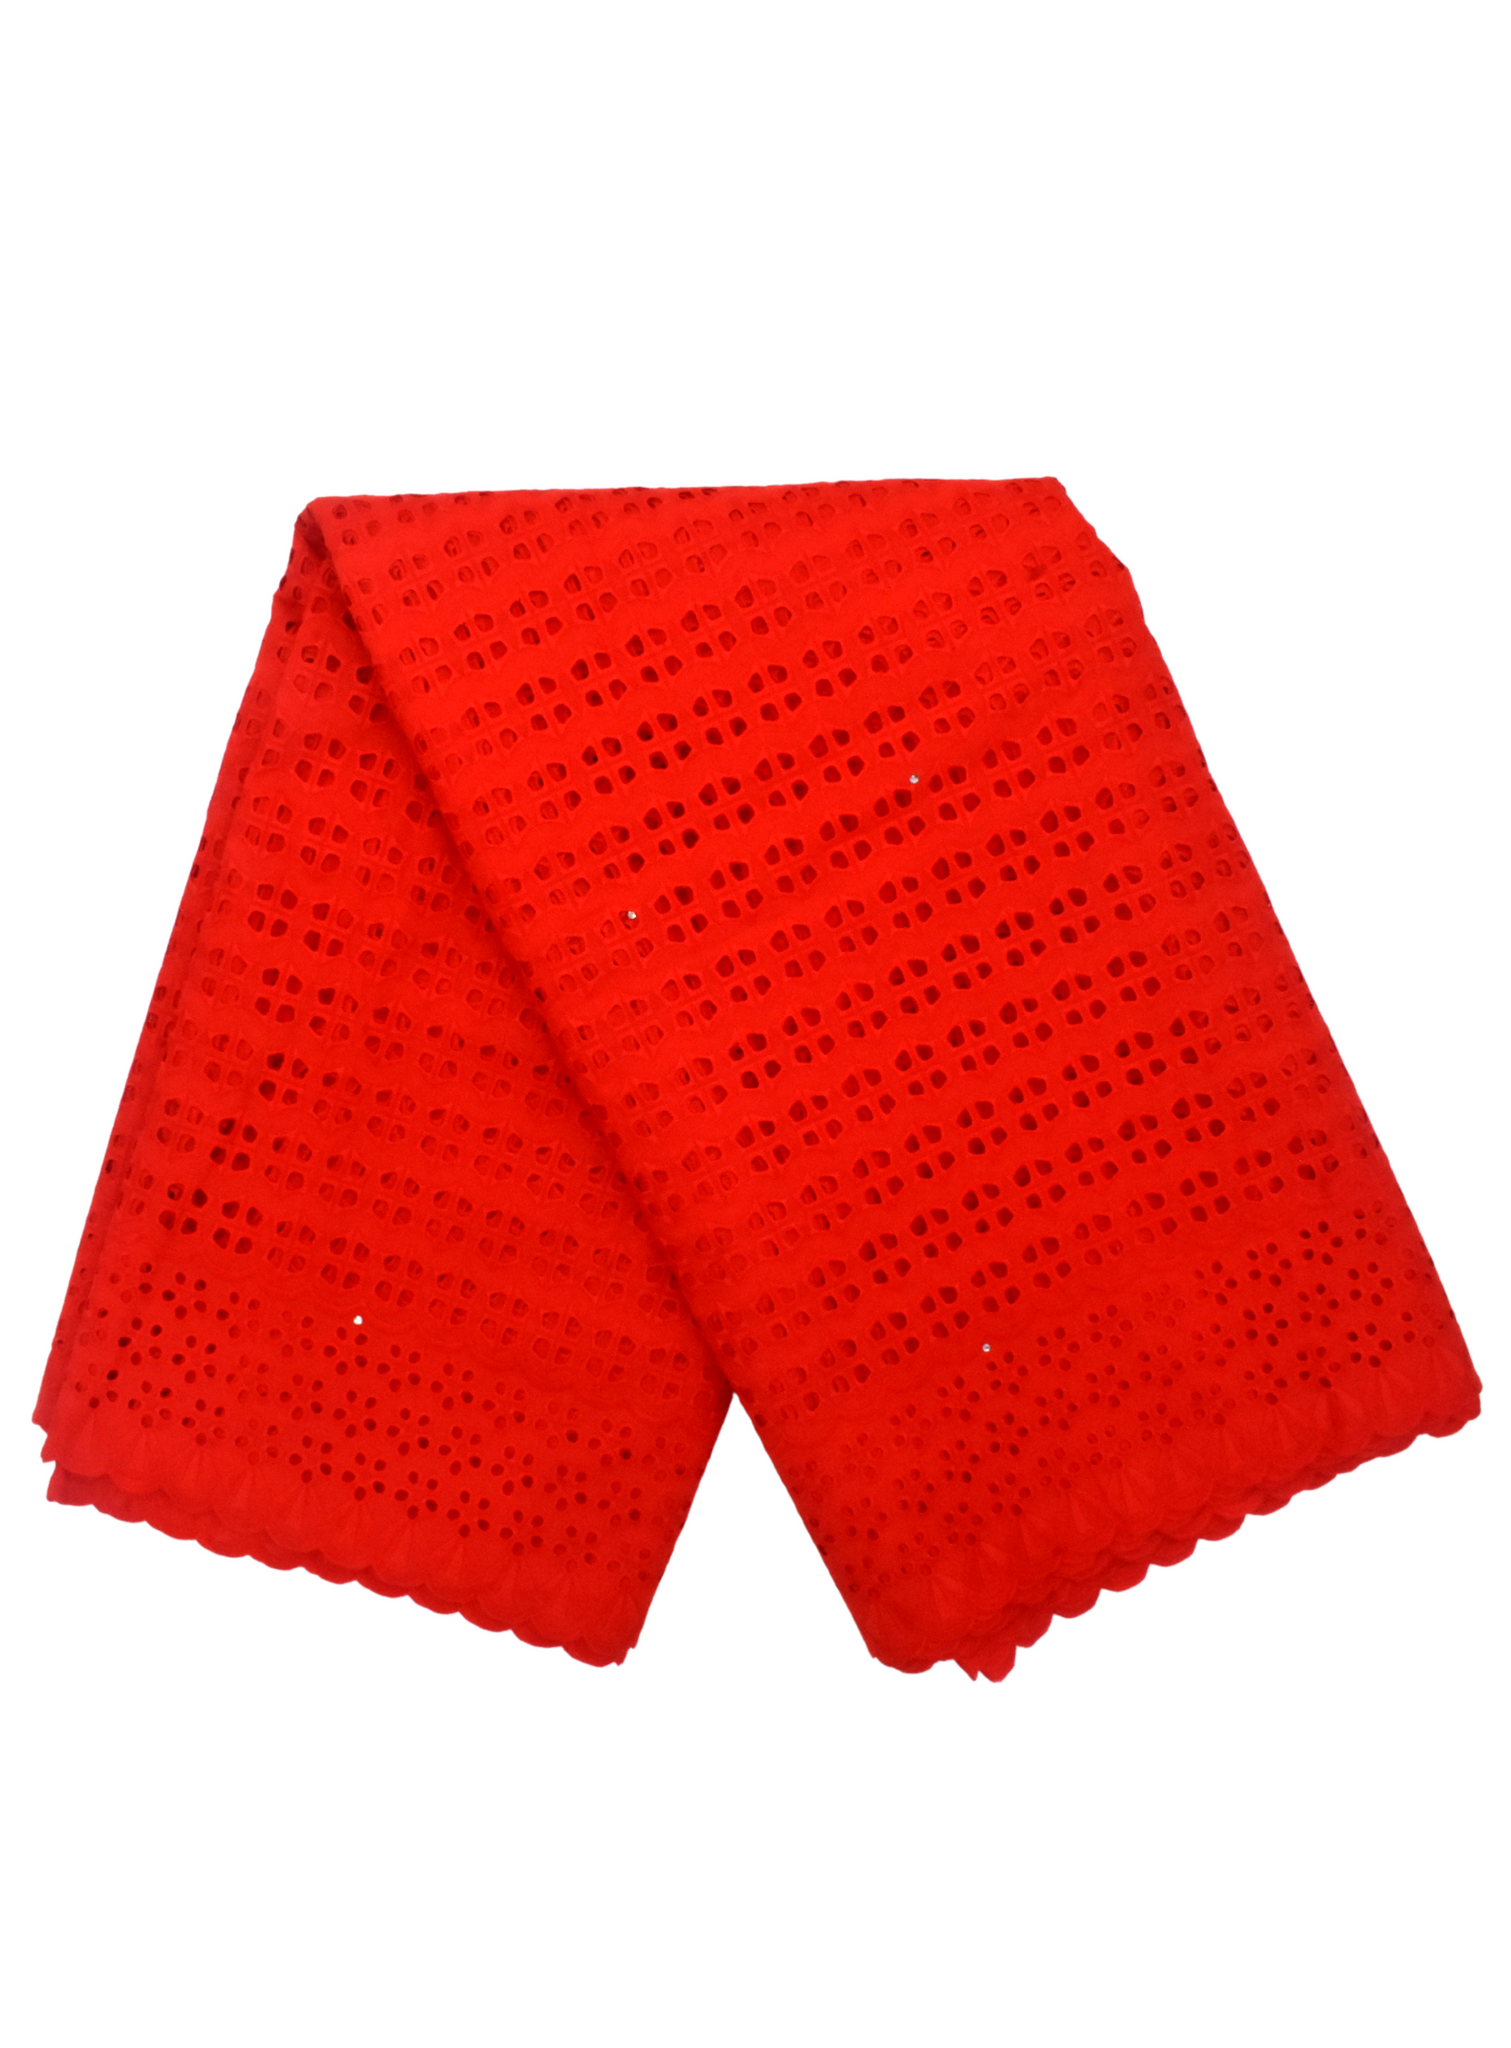 Red African Print Lace Circles - RL1